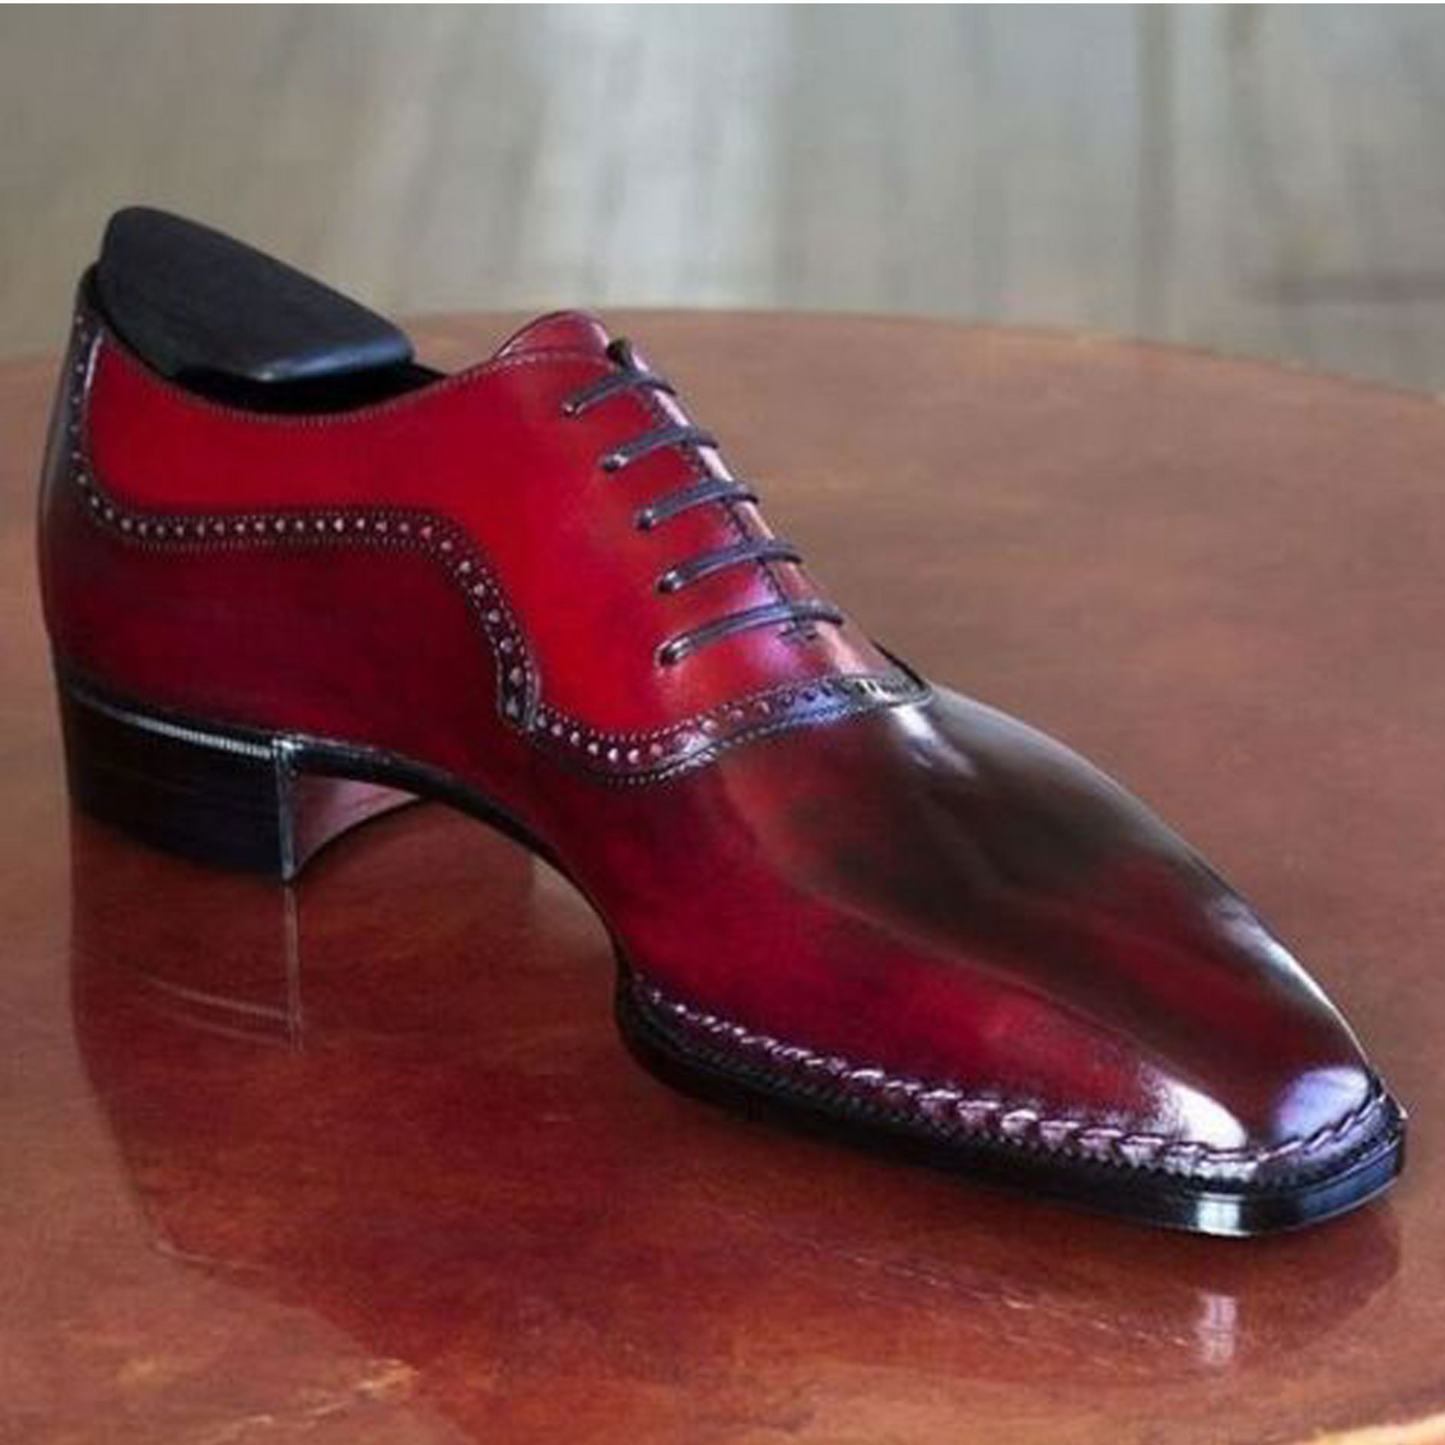 Tailor Made Handmade Premium Quality Burgundy Leather Oxford Shoes